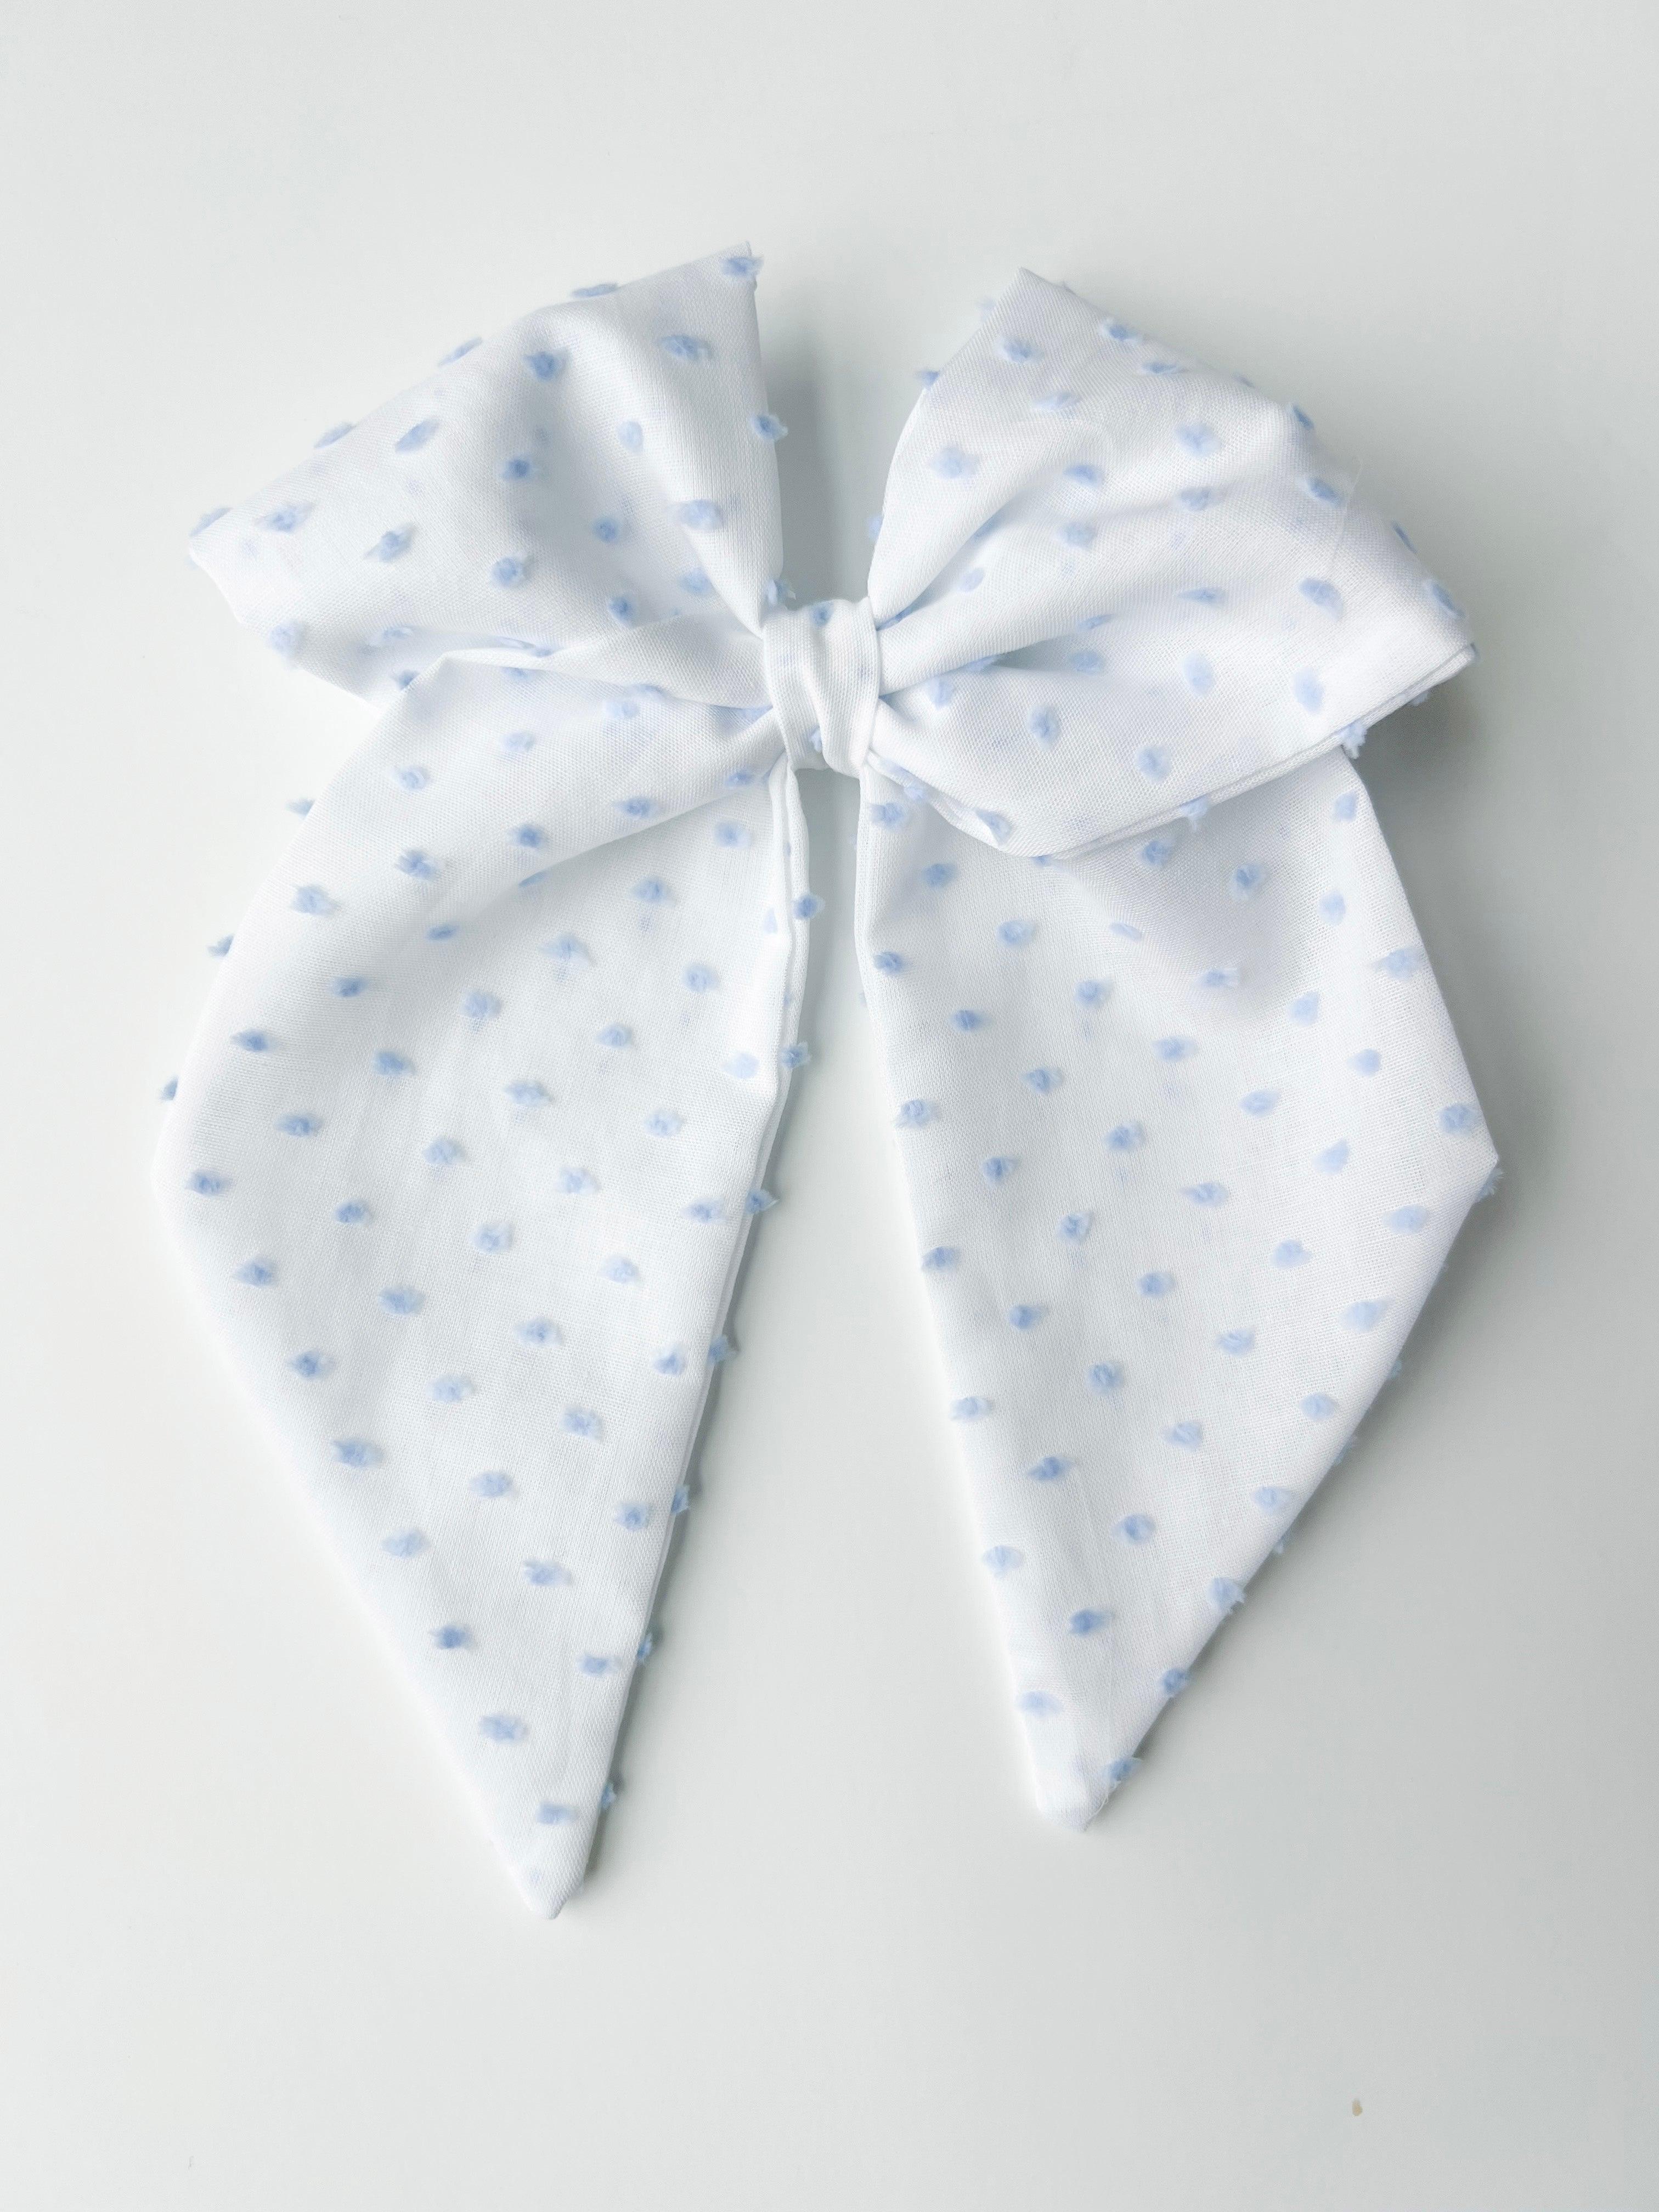 Vintage Sailor - Blue Swiss Dot | Nashville Bow Co. - Classic Hair Bows, Bow Ties, Basket Bows, Pacifier Clips, Wreath Sashes, Swaddle Bows. Classic Southern Charm.